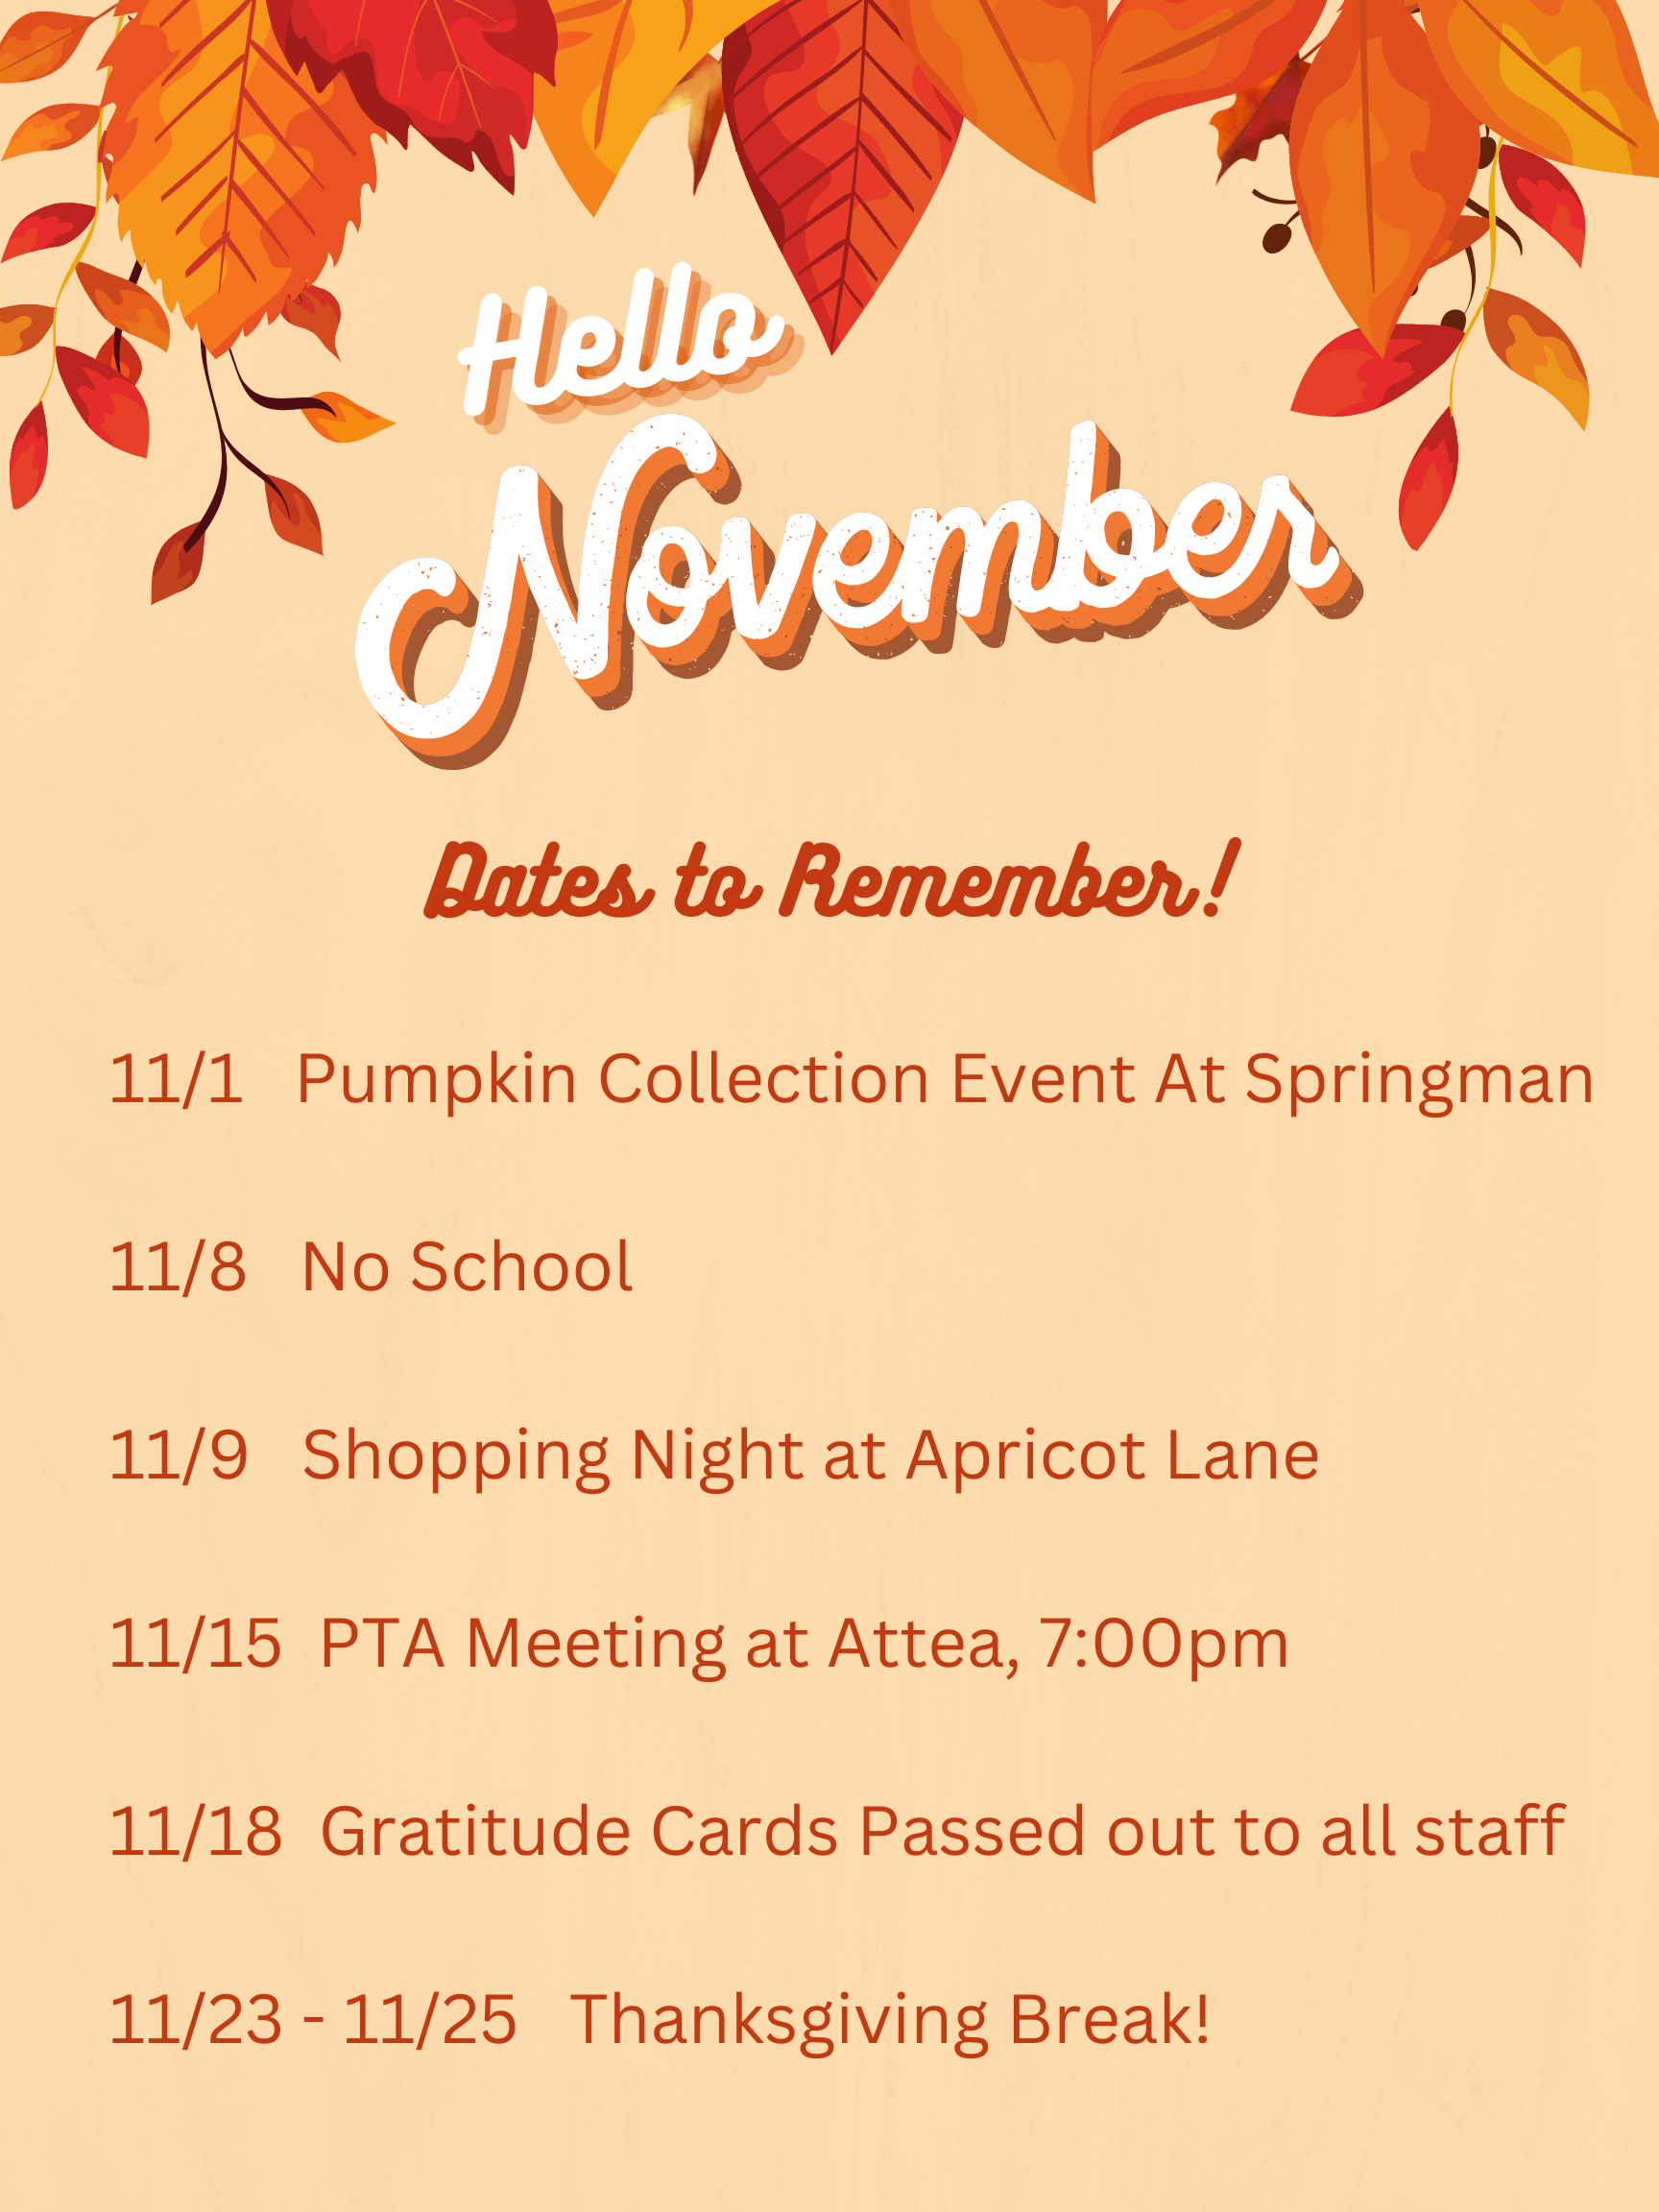 November Dates to Remember! 11/1 Pumpkin Collection Event at Springman 11/8 No School 11/9 Shopping Night at Apricot Lane, 11/15 PTA Meeting at Attea, 7pm, 11/18 Gratitude Cards passed out to all staff,